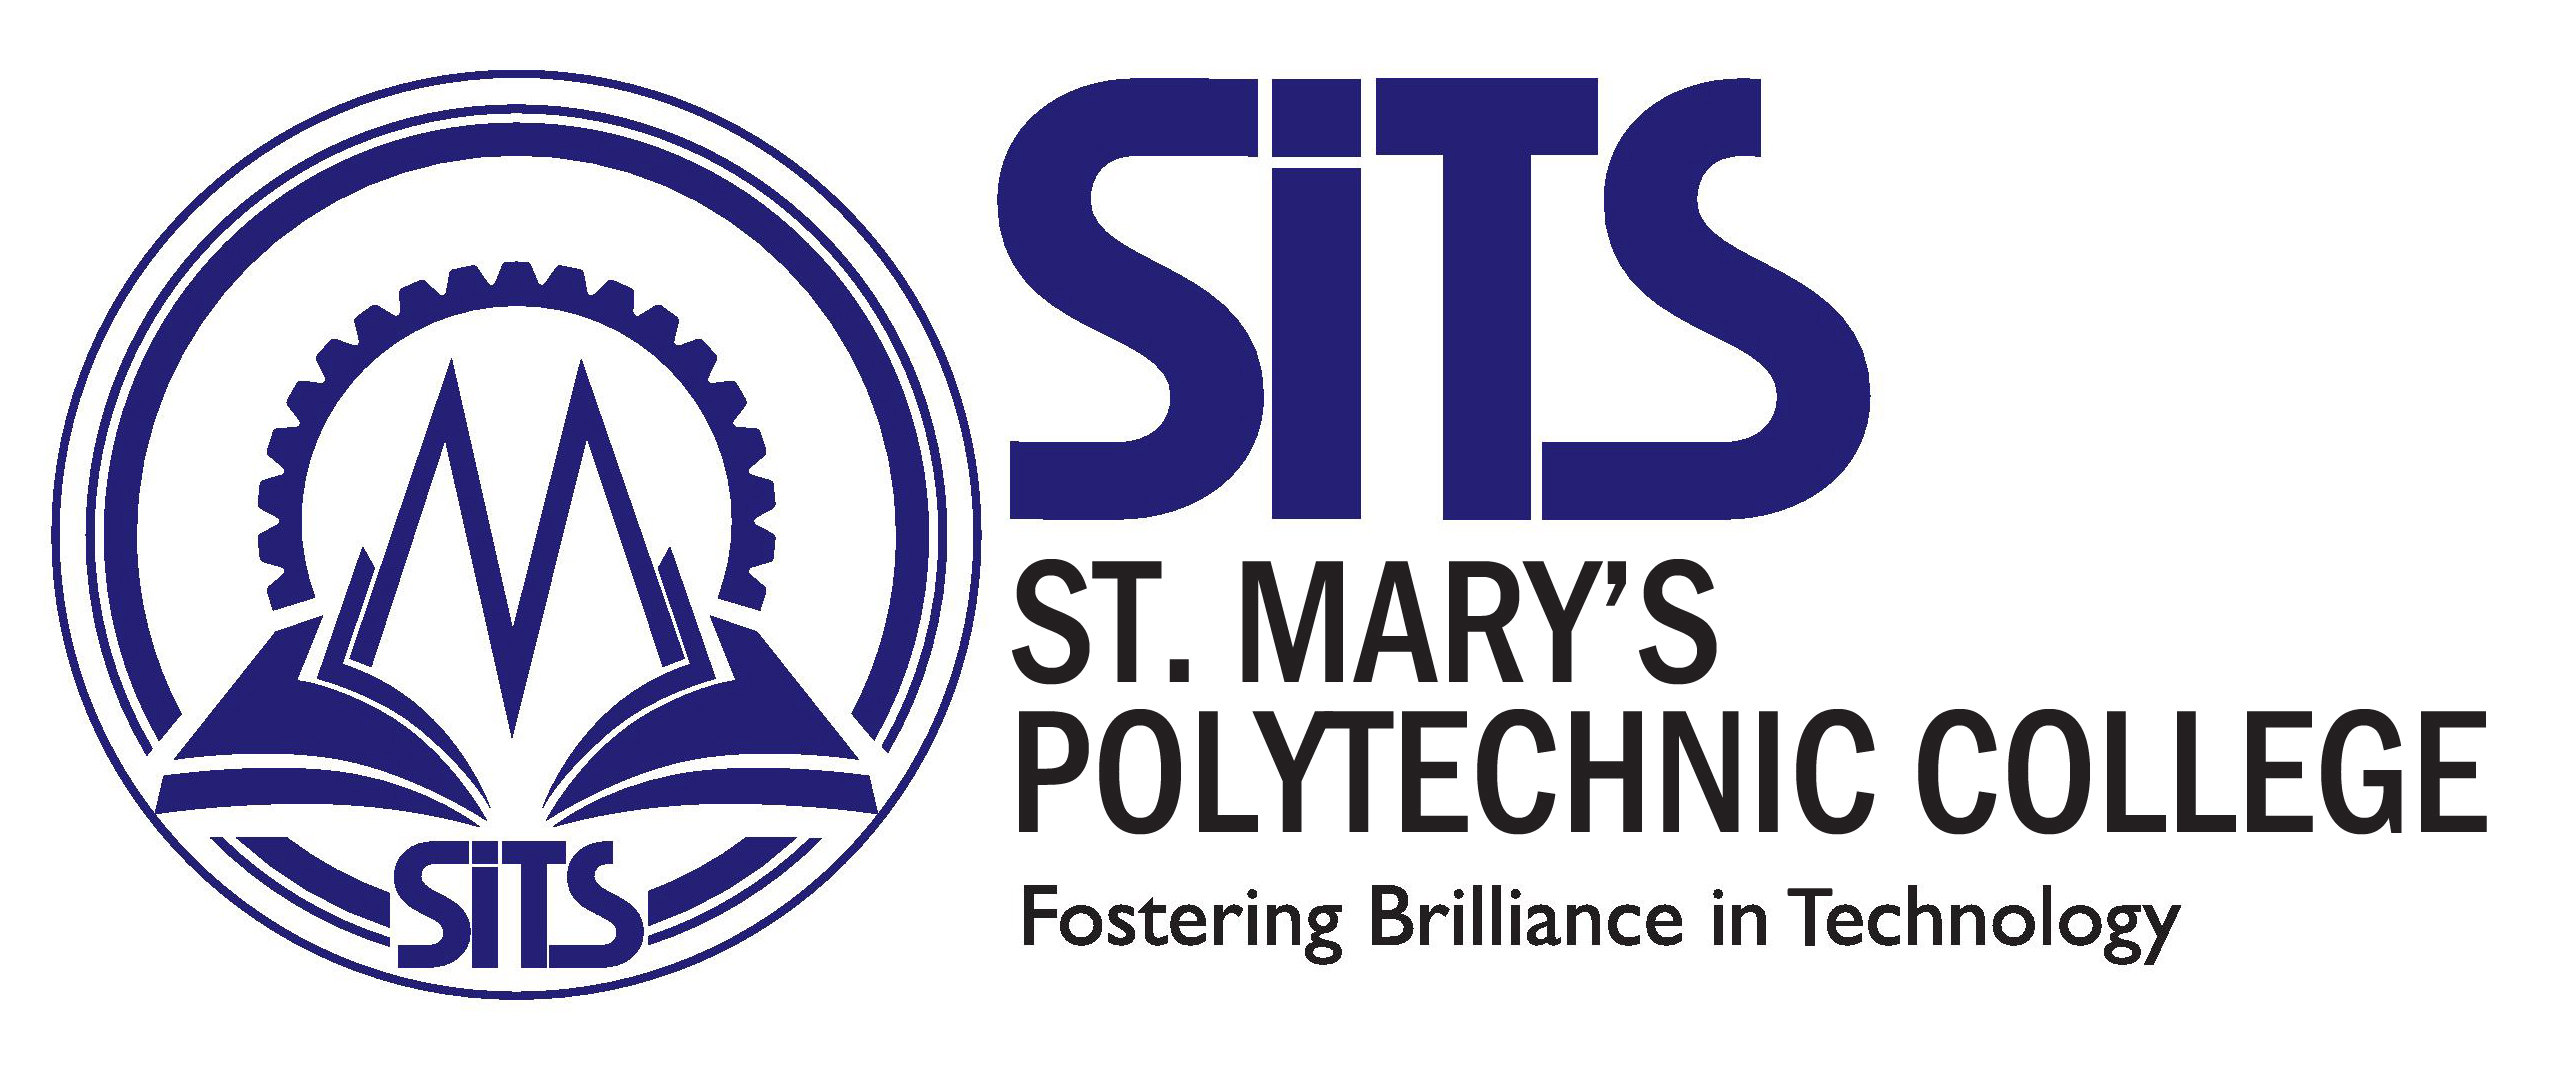 ST. MARY'S POLYTECHNIC COLLEGE